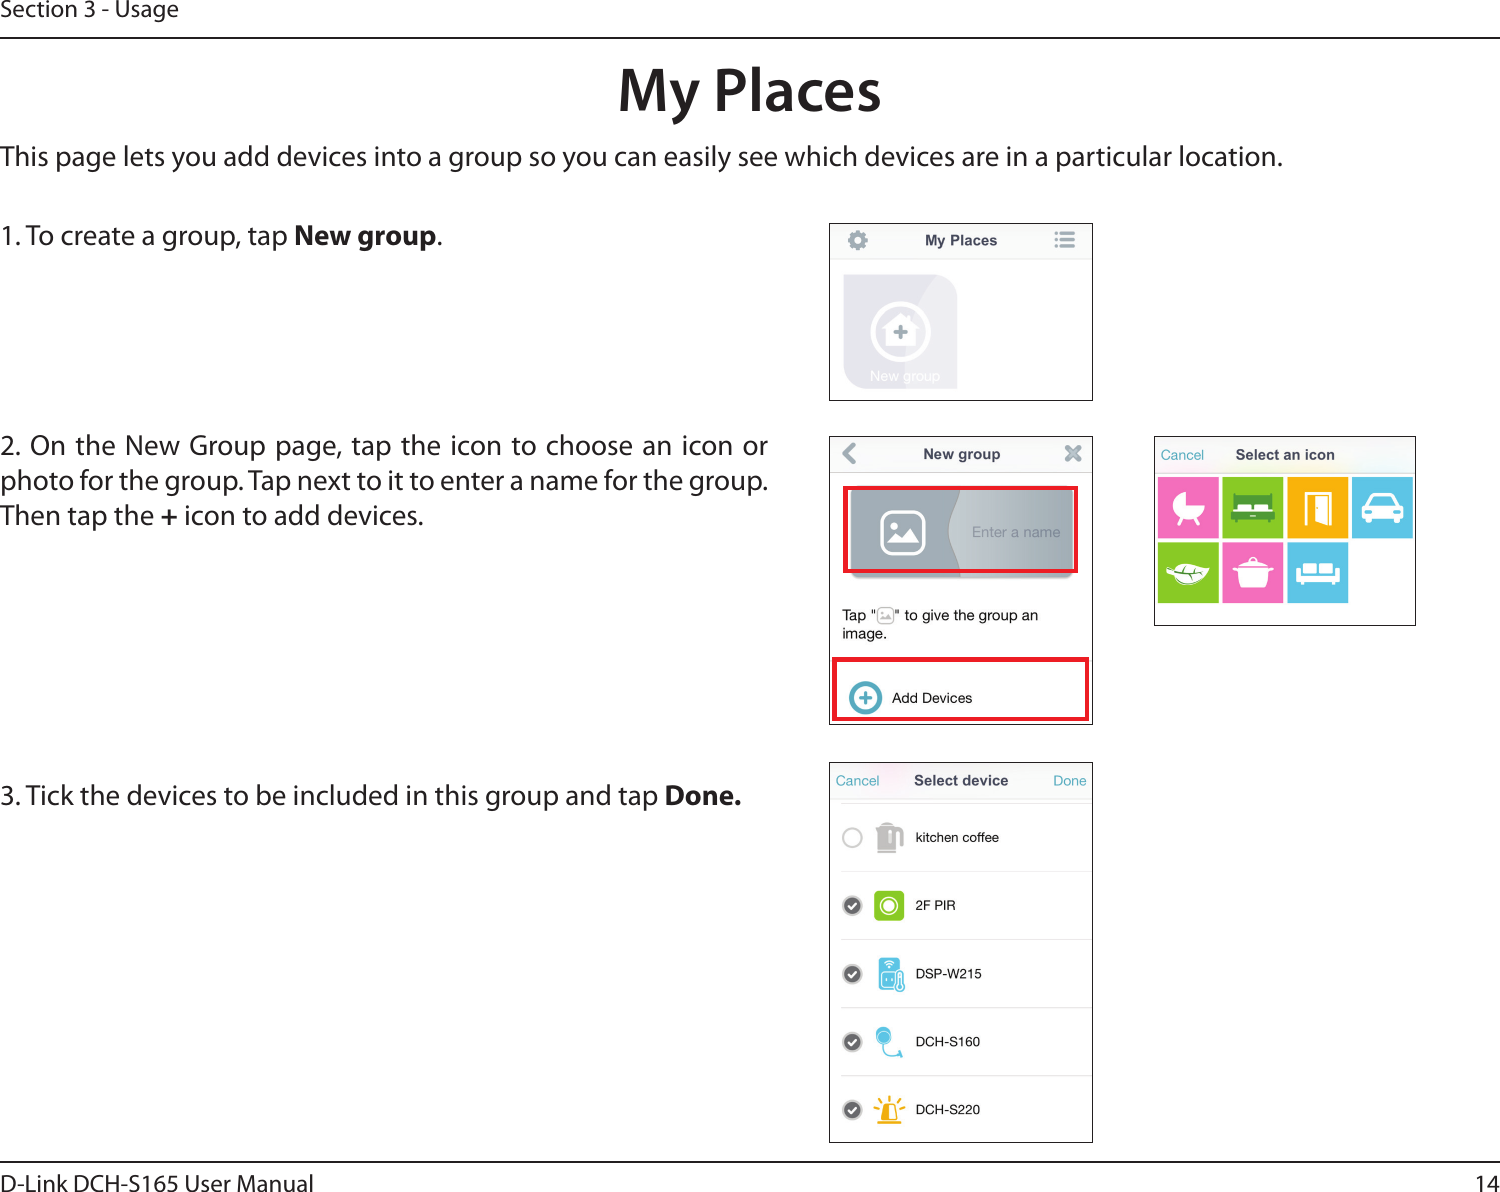 14D-Link DCH-S165 User ManualSection 3 - UsageMy PlacesThis page lets you add devices into a group so you can easily see which devices are in a particular location.1. To create a group, tap New group.2. On the New Group page, tap the icon to choose an icon or photo for the group. Tap next to it to enter a name for the group. Then tap the + icon to add devices.  3. Tick the devices to be included in this group and tap Done.